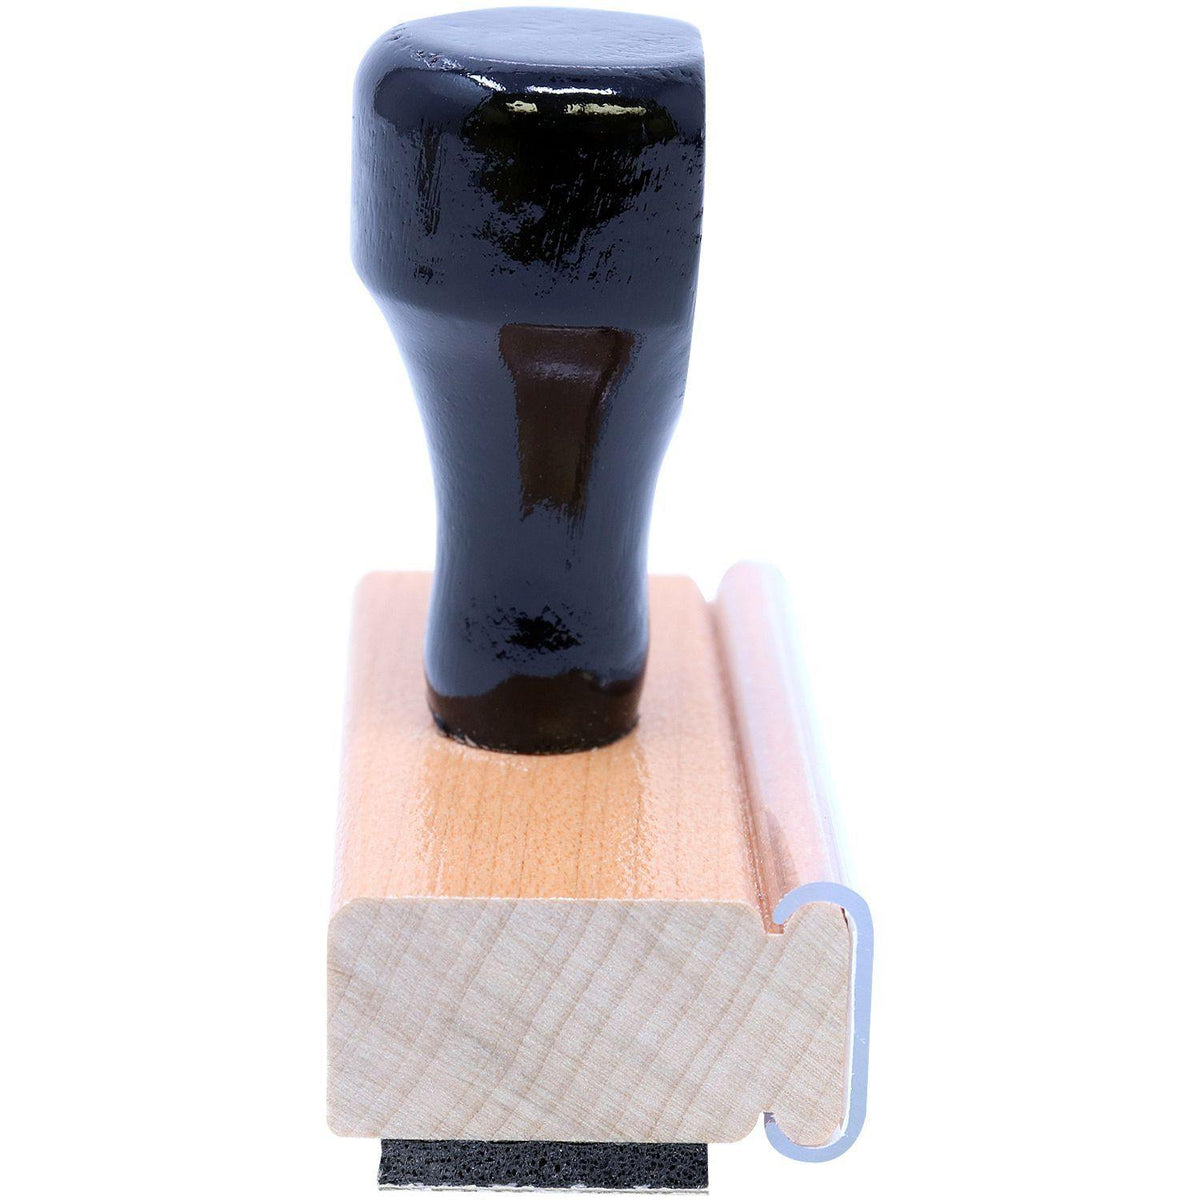 Narrow For Deposit Only Rubber Stamp - Engineer Seal Stamps - Brand_Acorn, Impression Size_Small, Stamp Type_Regular Stamp, Type of Use_Business, Type of Use_Finance, Type of Use_Office